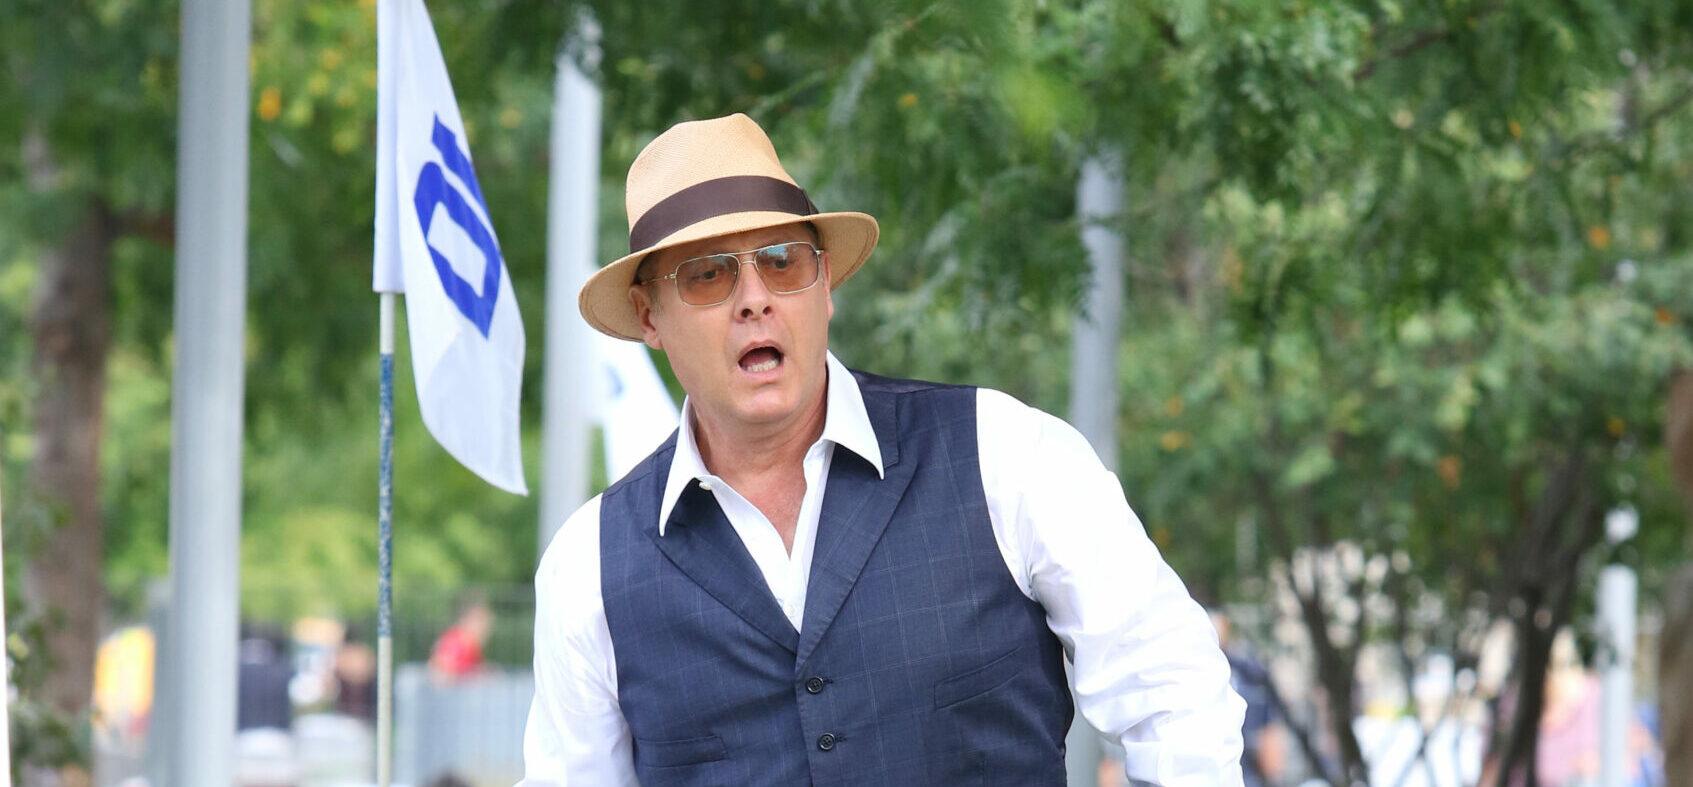 James Spader and Megan Boone play Mini Golf in NYC, The Blacklist